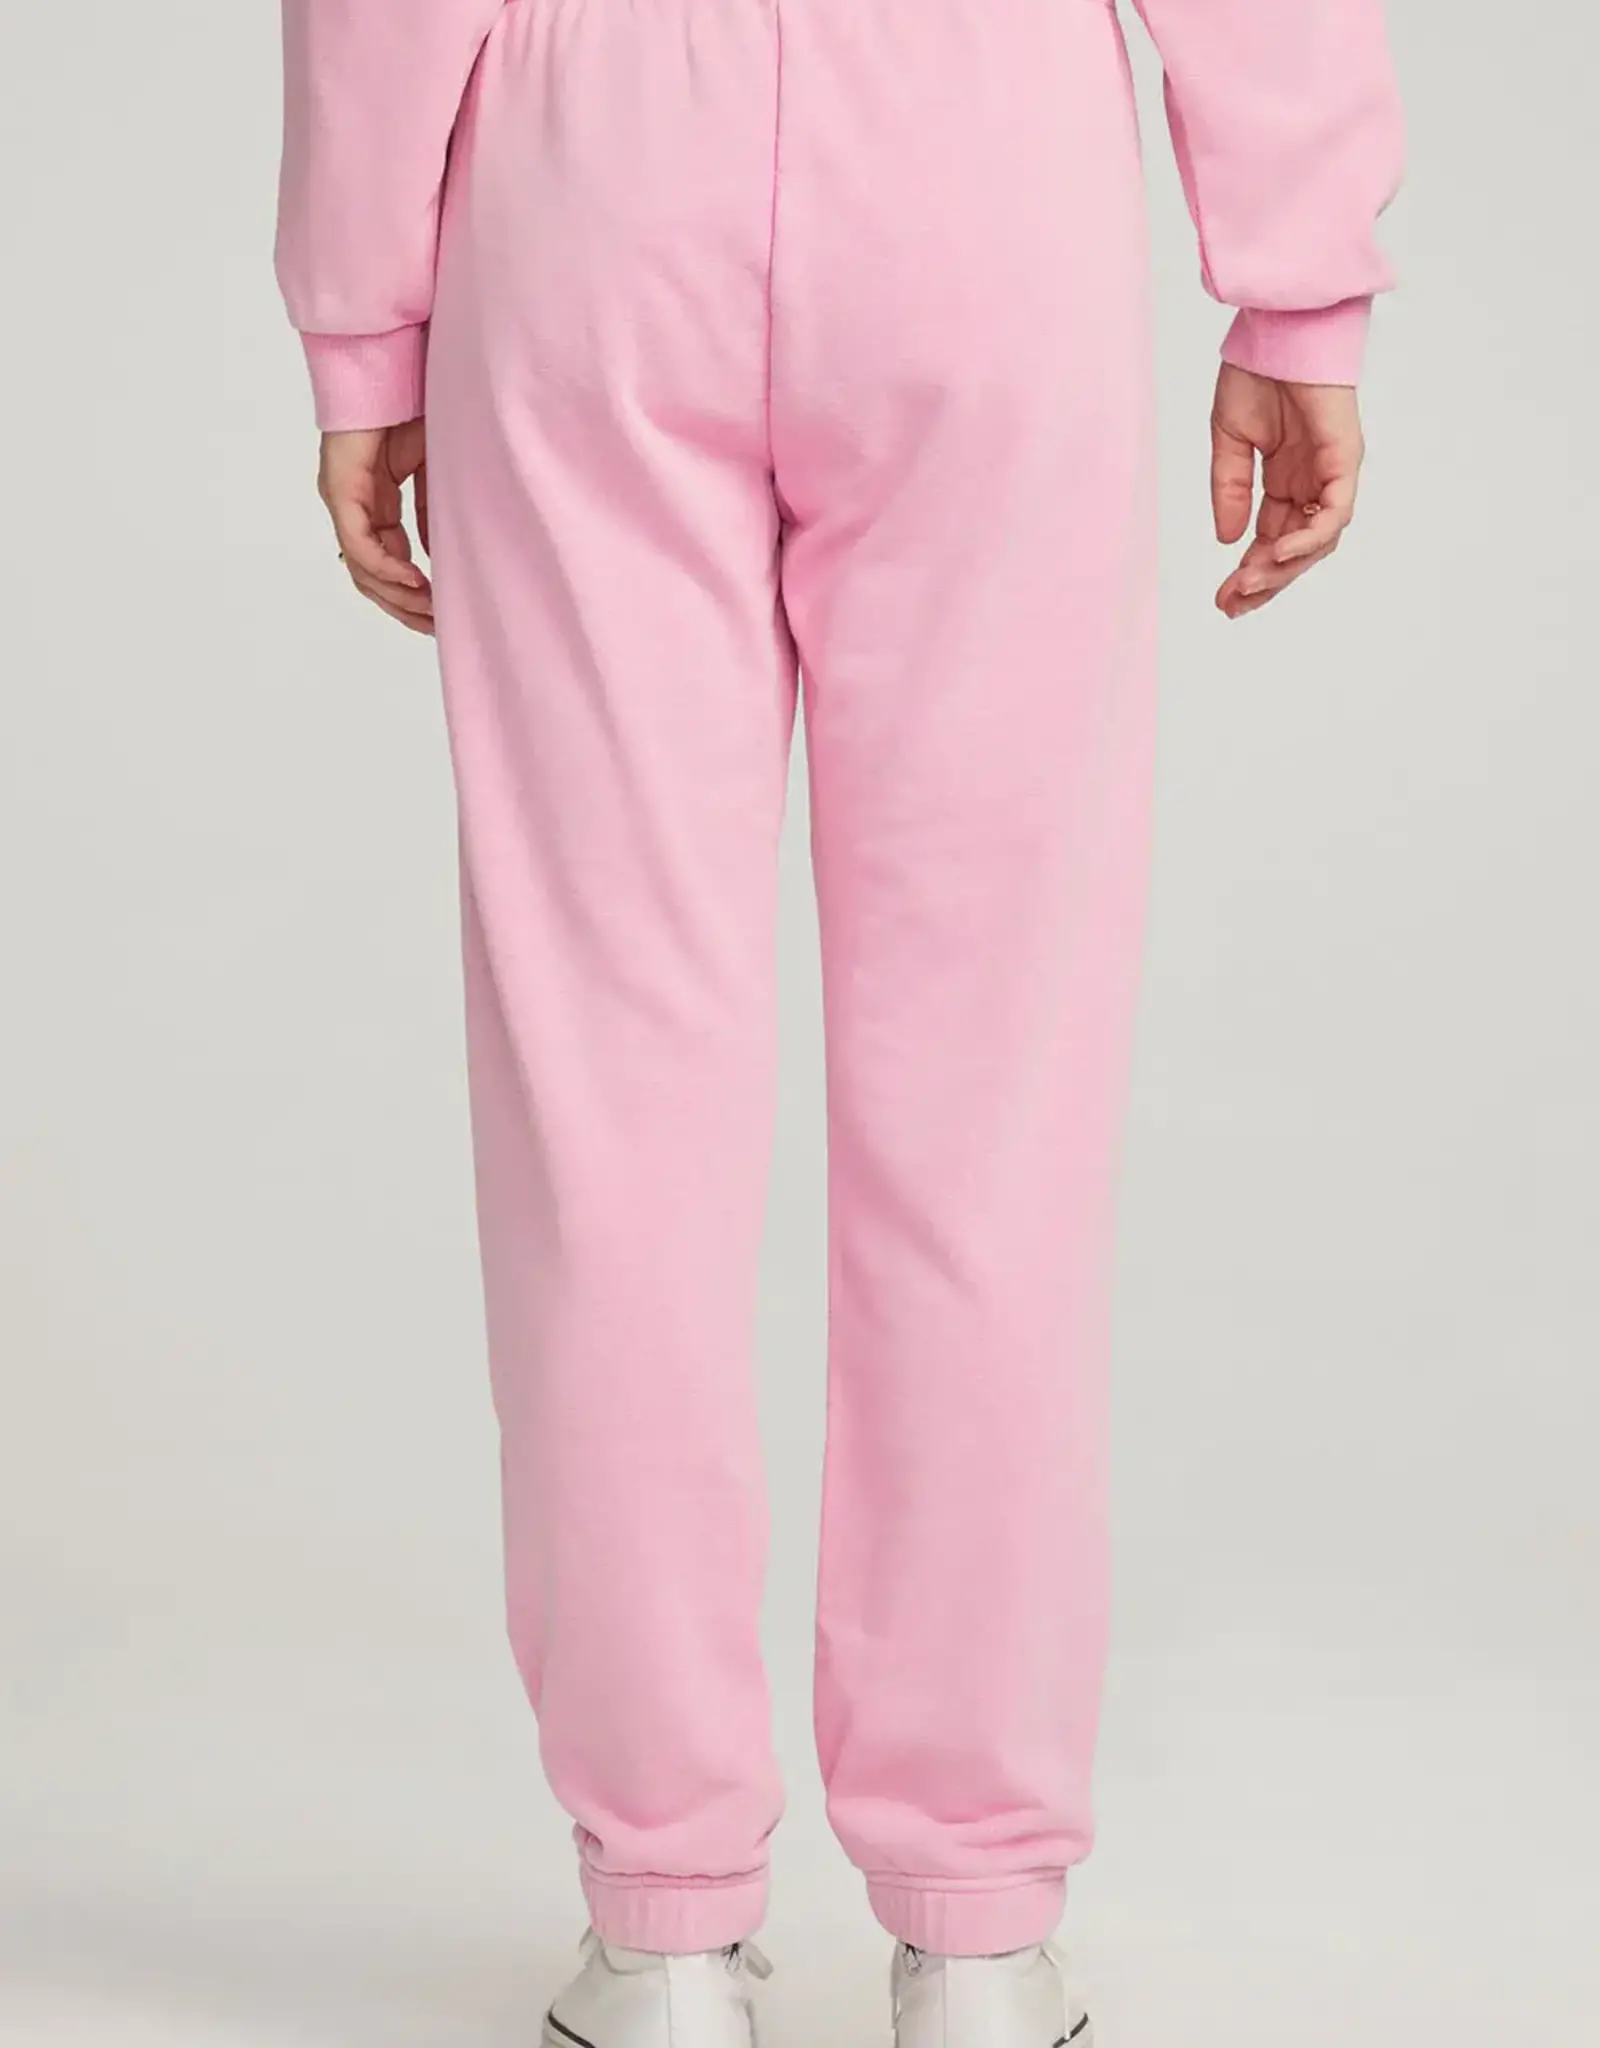 Saltwater Luxe Saltwater Luxe Prism Pink Heart Pant